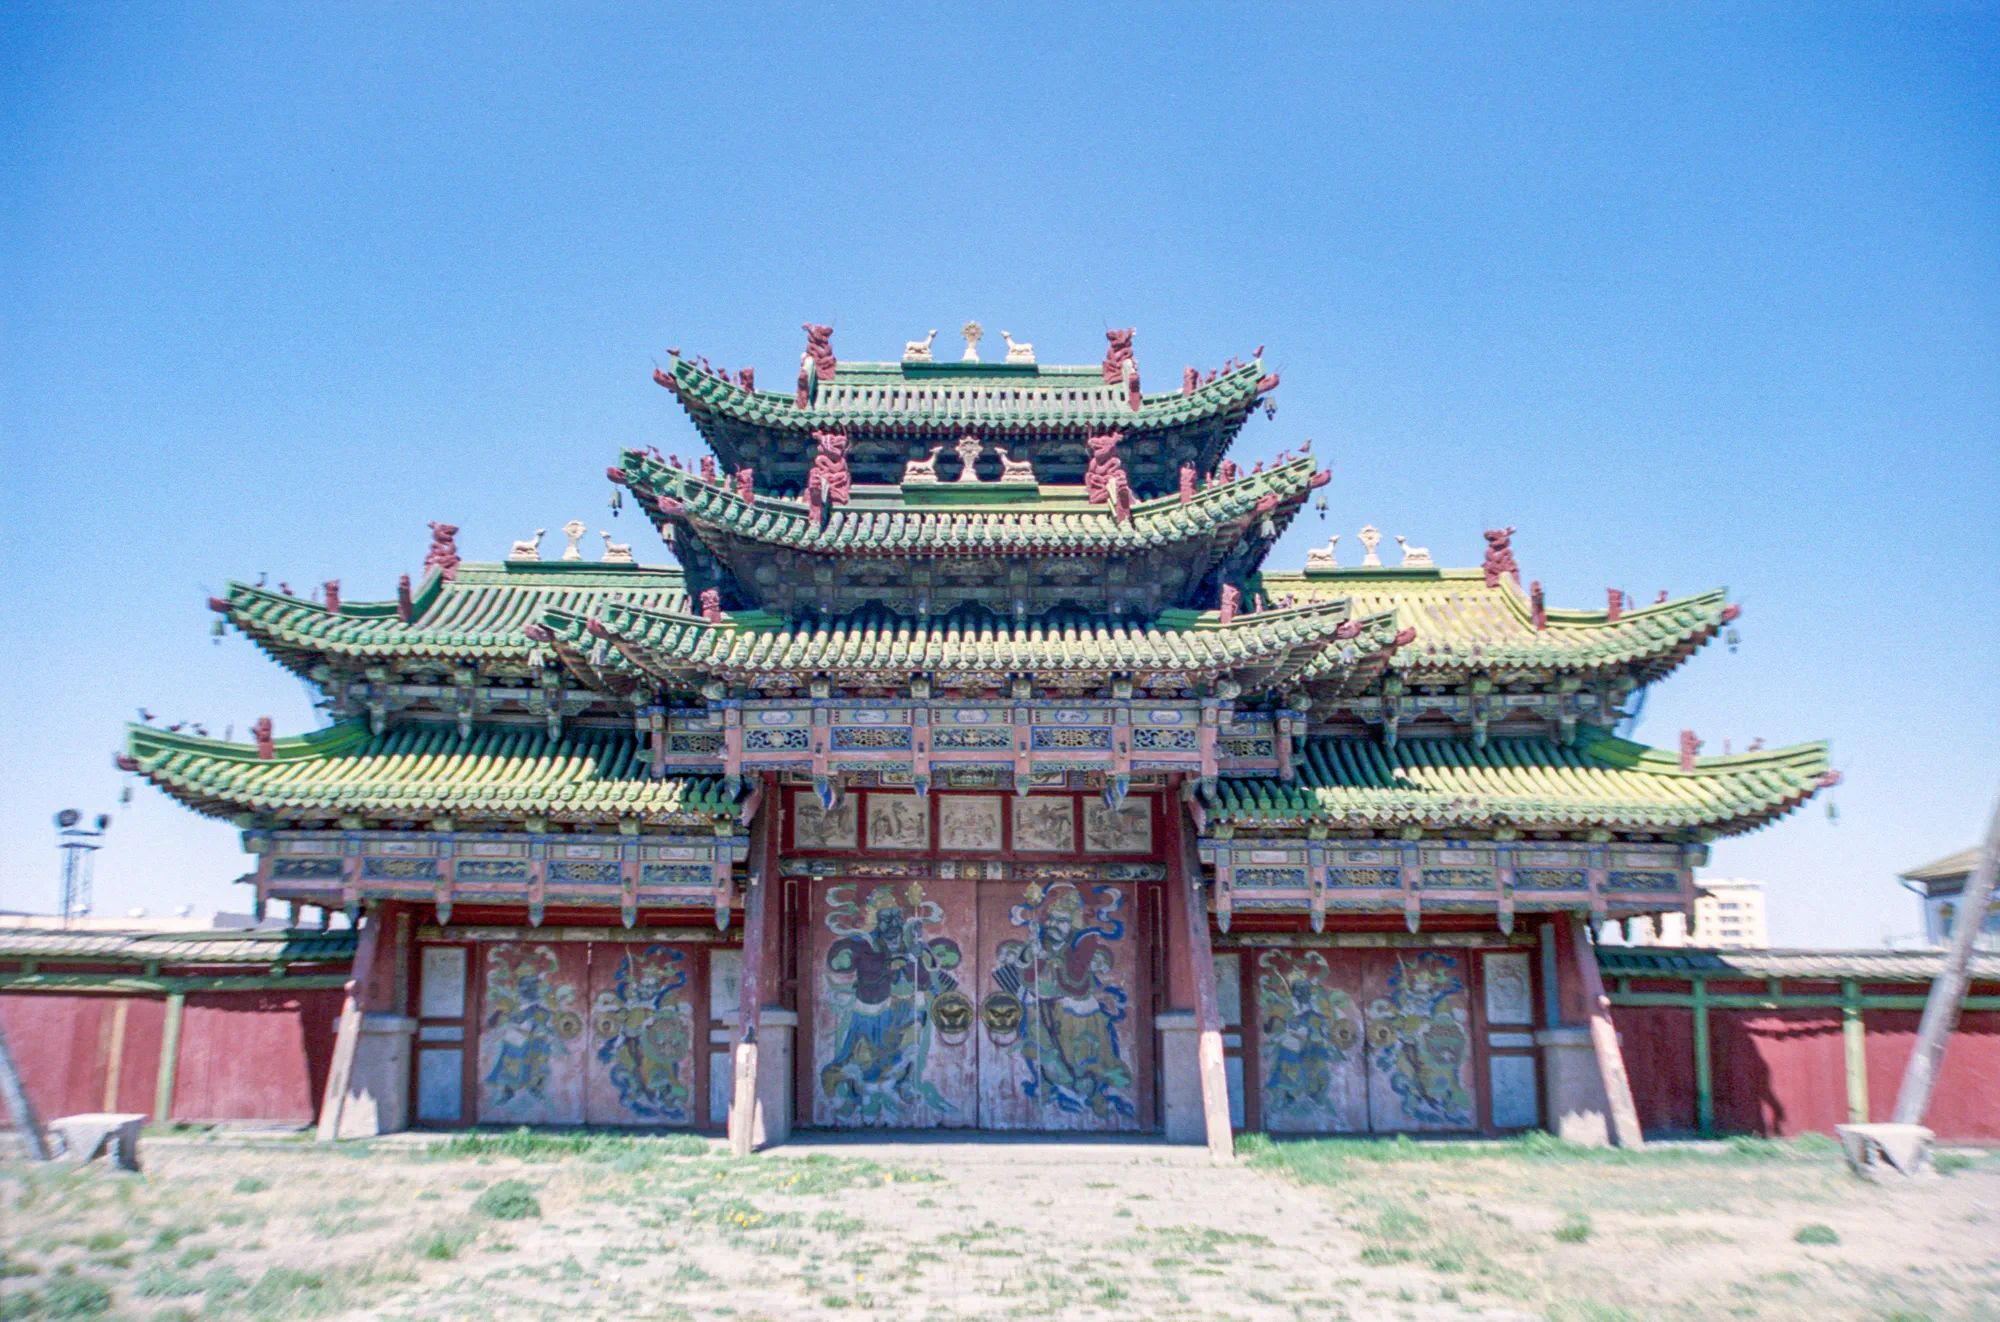 Gate to the Bogd Khan Palace Museum